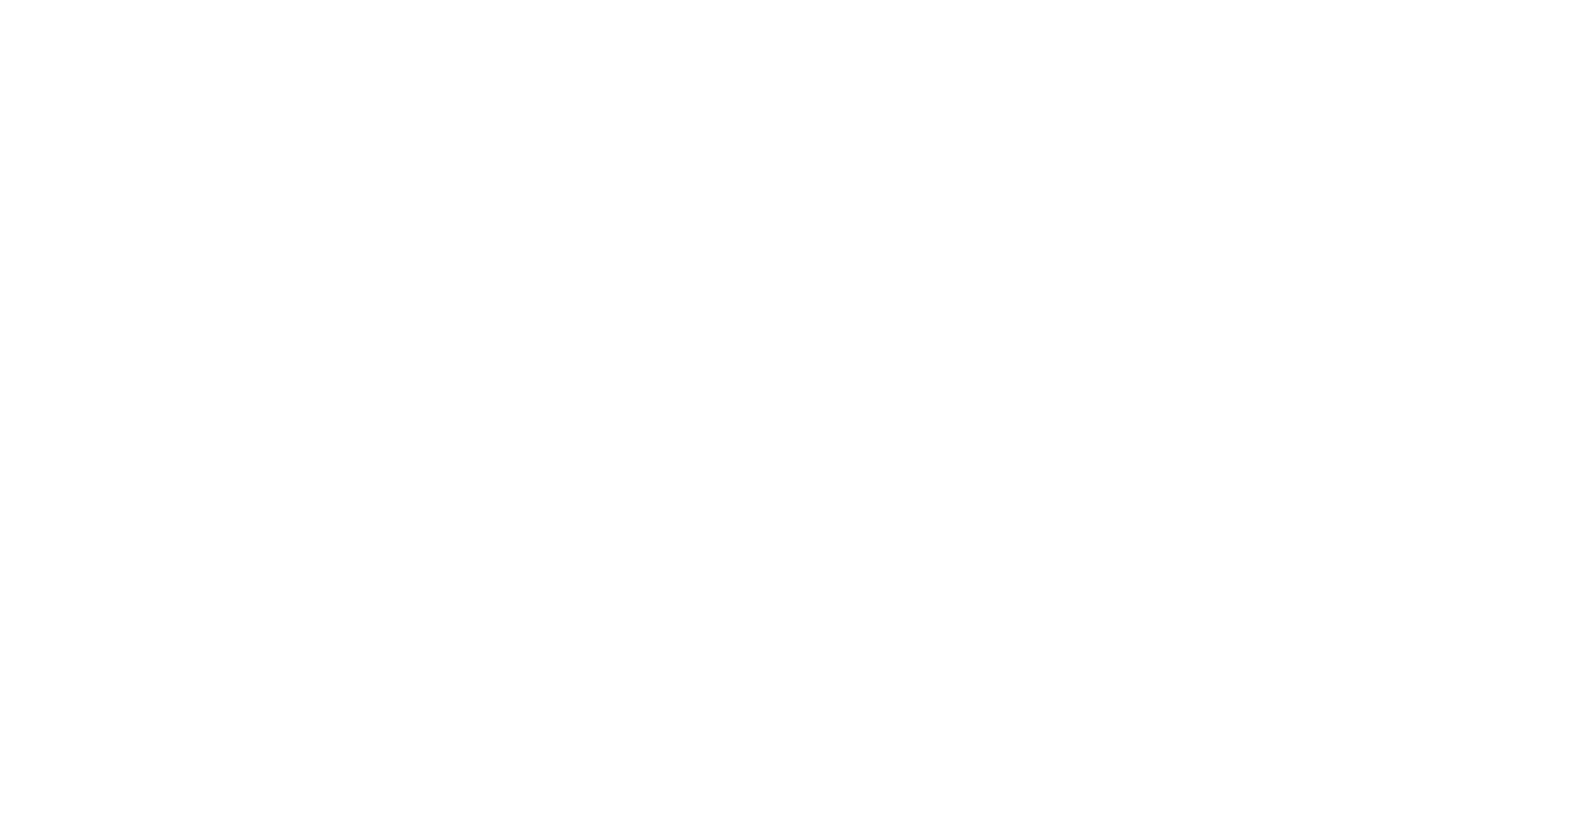 Kuwait Projects Company Holding logo large for dark backgrounds (transparent PNG)